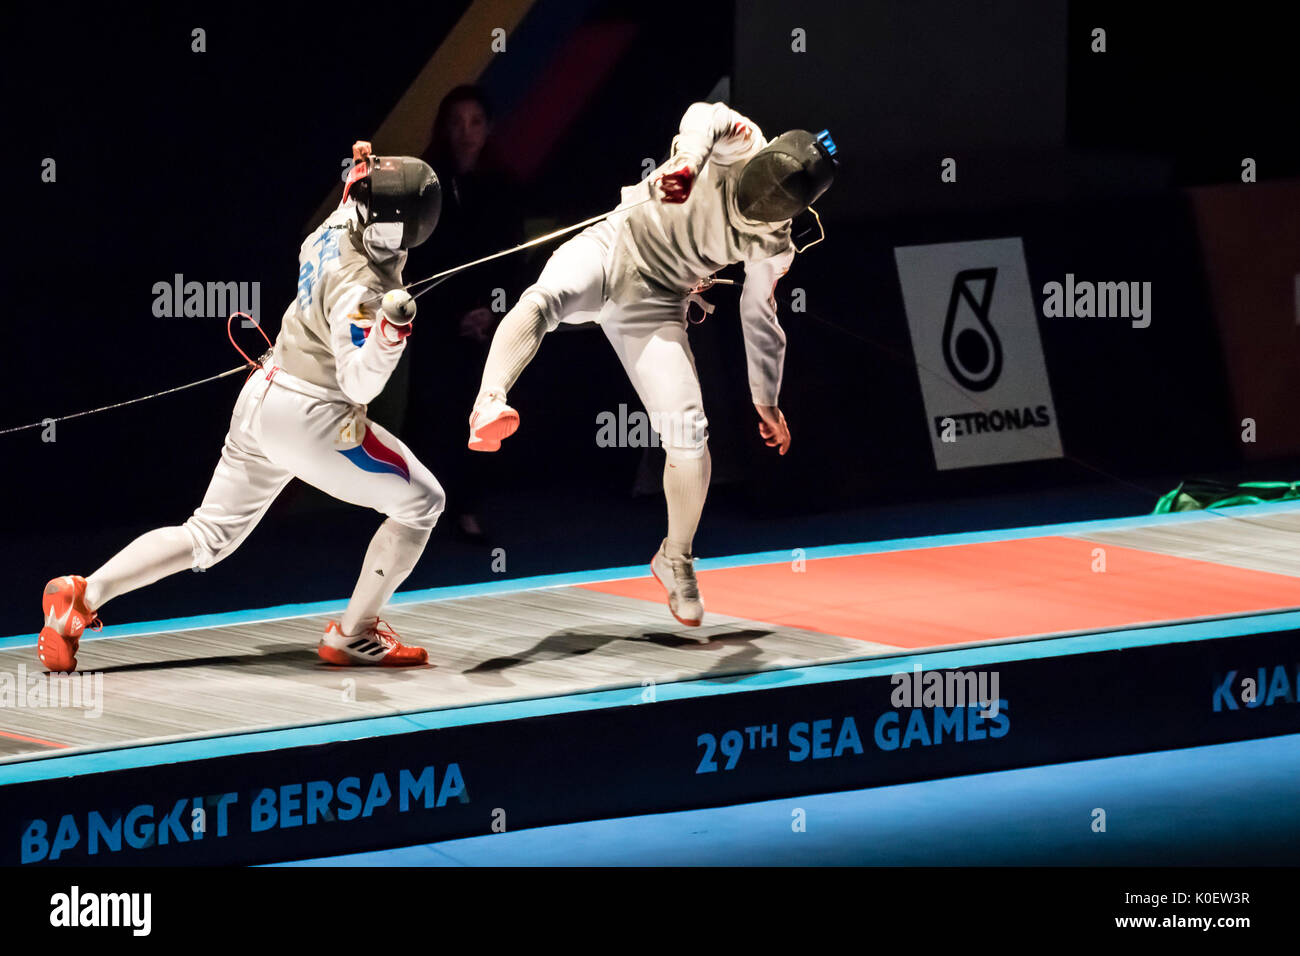 Kuala Lumpur, Malaysia. 22nd Aug, 2017. Fencing semi finals Men's Foil Individual Jet Ng from Singapore (SGP) twisted his right leg ankle during competition. After medic help to bandage his ankle, Ng play on. Perez of Philippines (PHI) won. Credit: Danny Chan/Alamy Live News Stock Photo